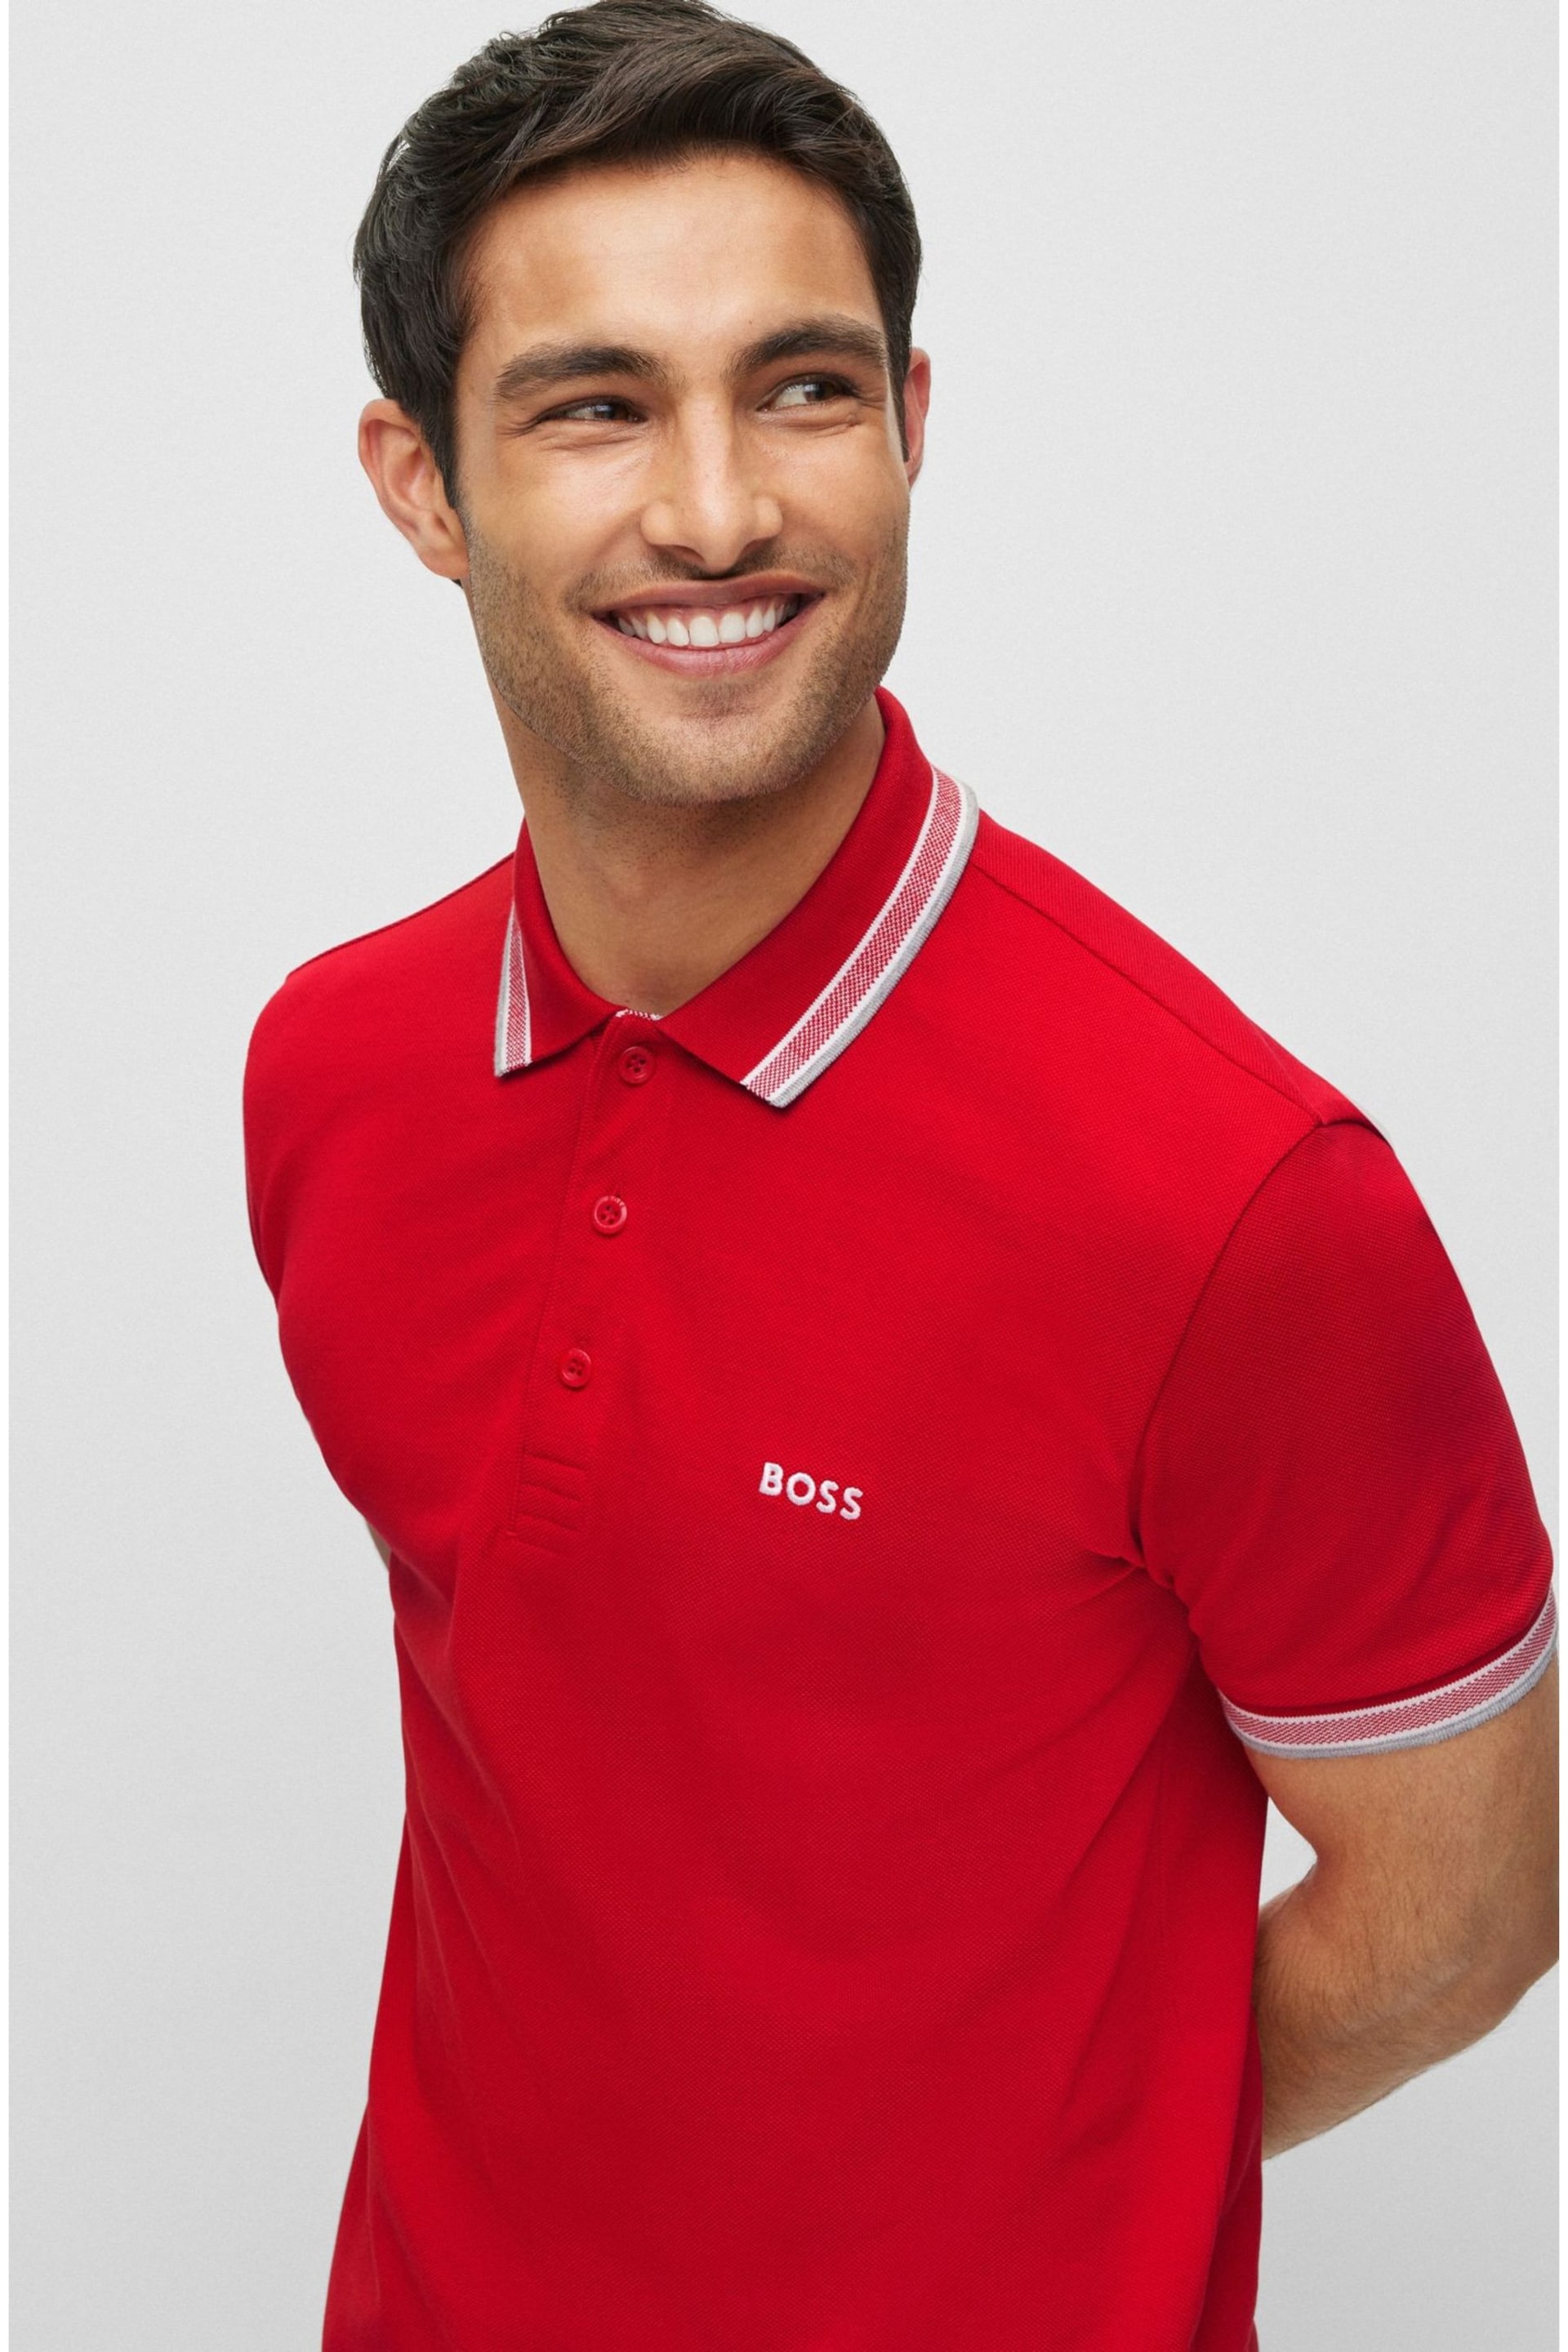 BOSS Red/Grey Tipping Paddy Polo Shirt - Image 4 of 5